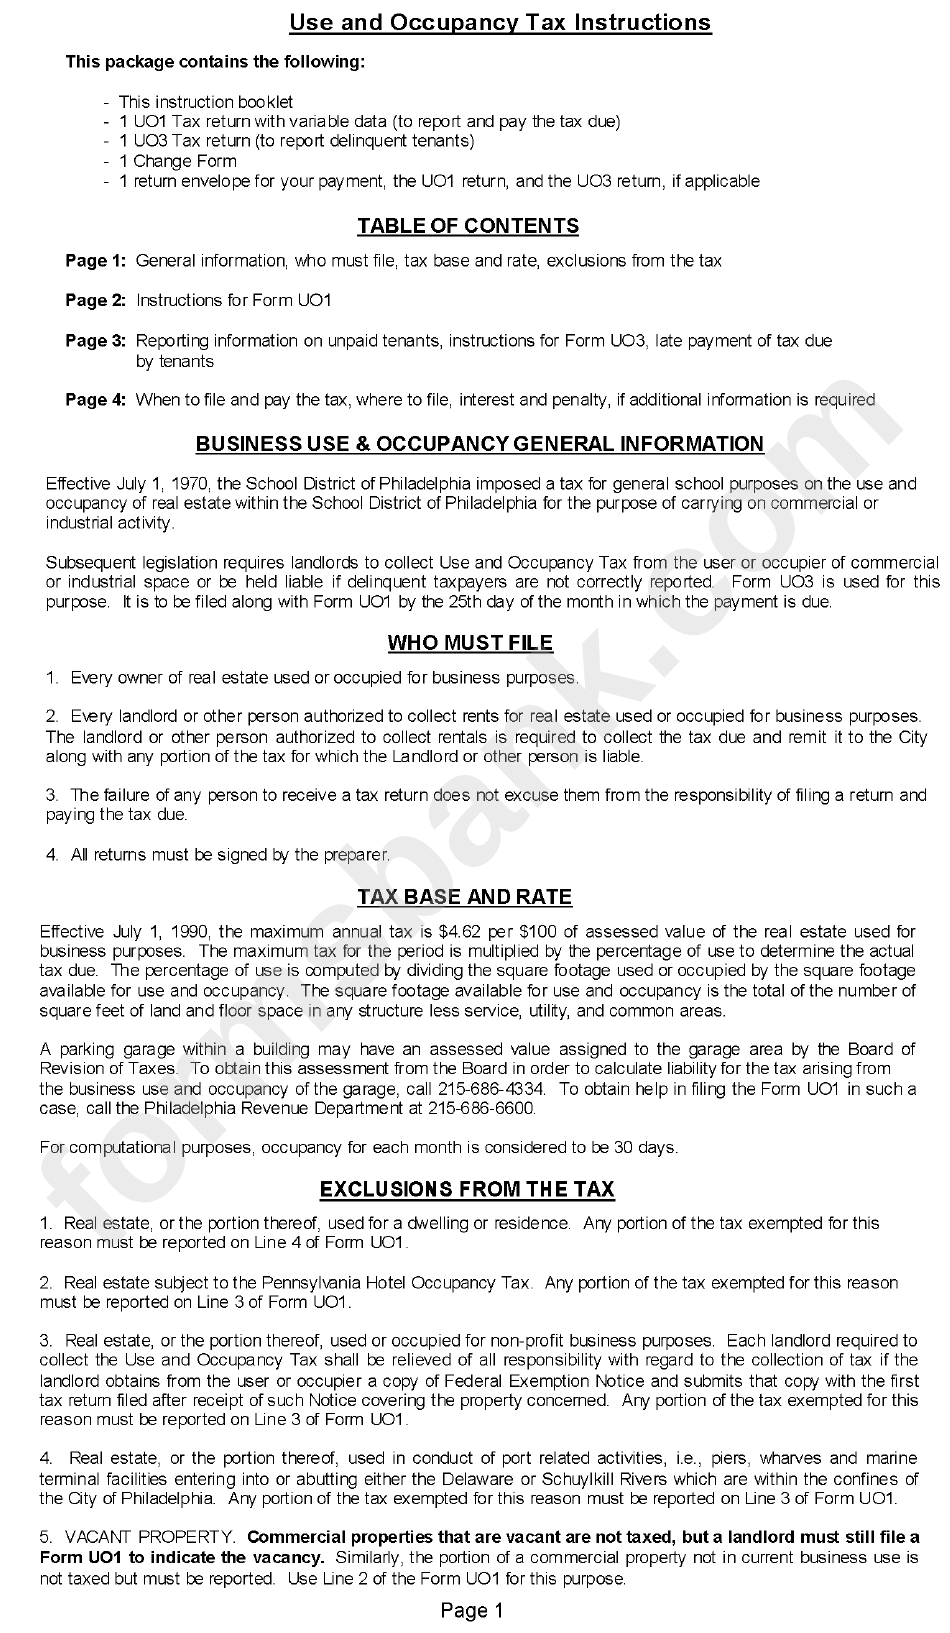 Use And Occupancy Tax Instructions Sheet